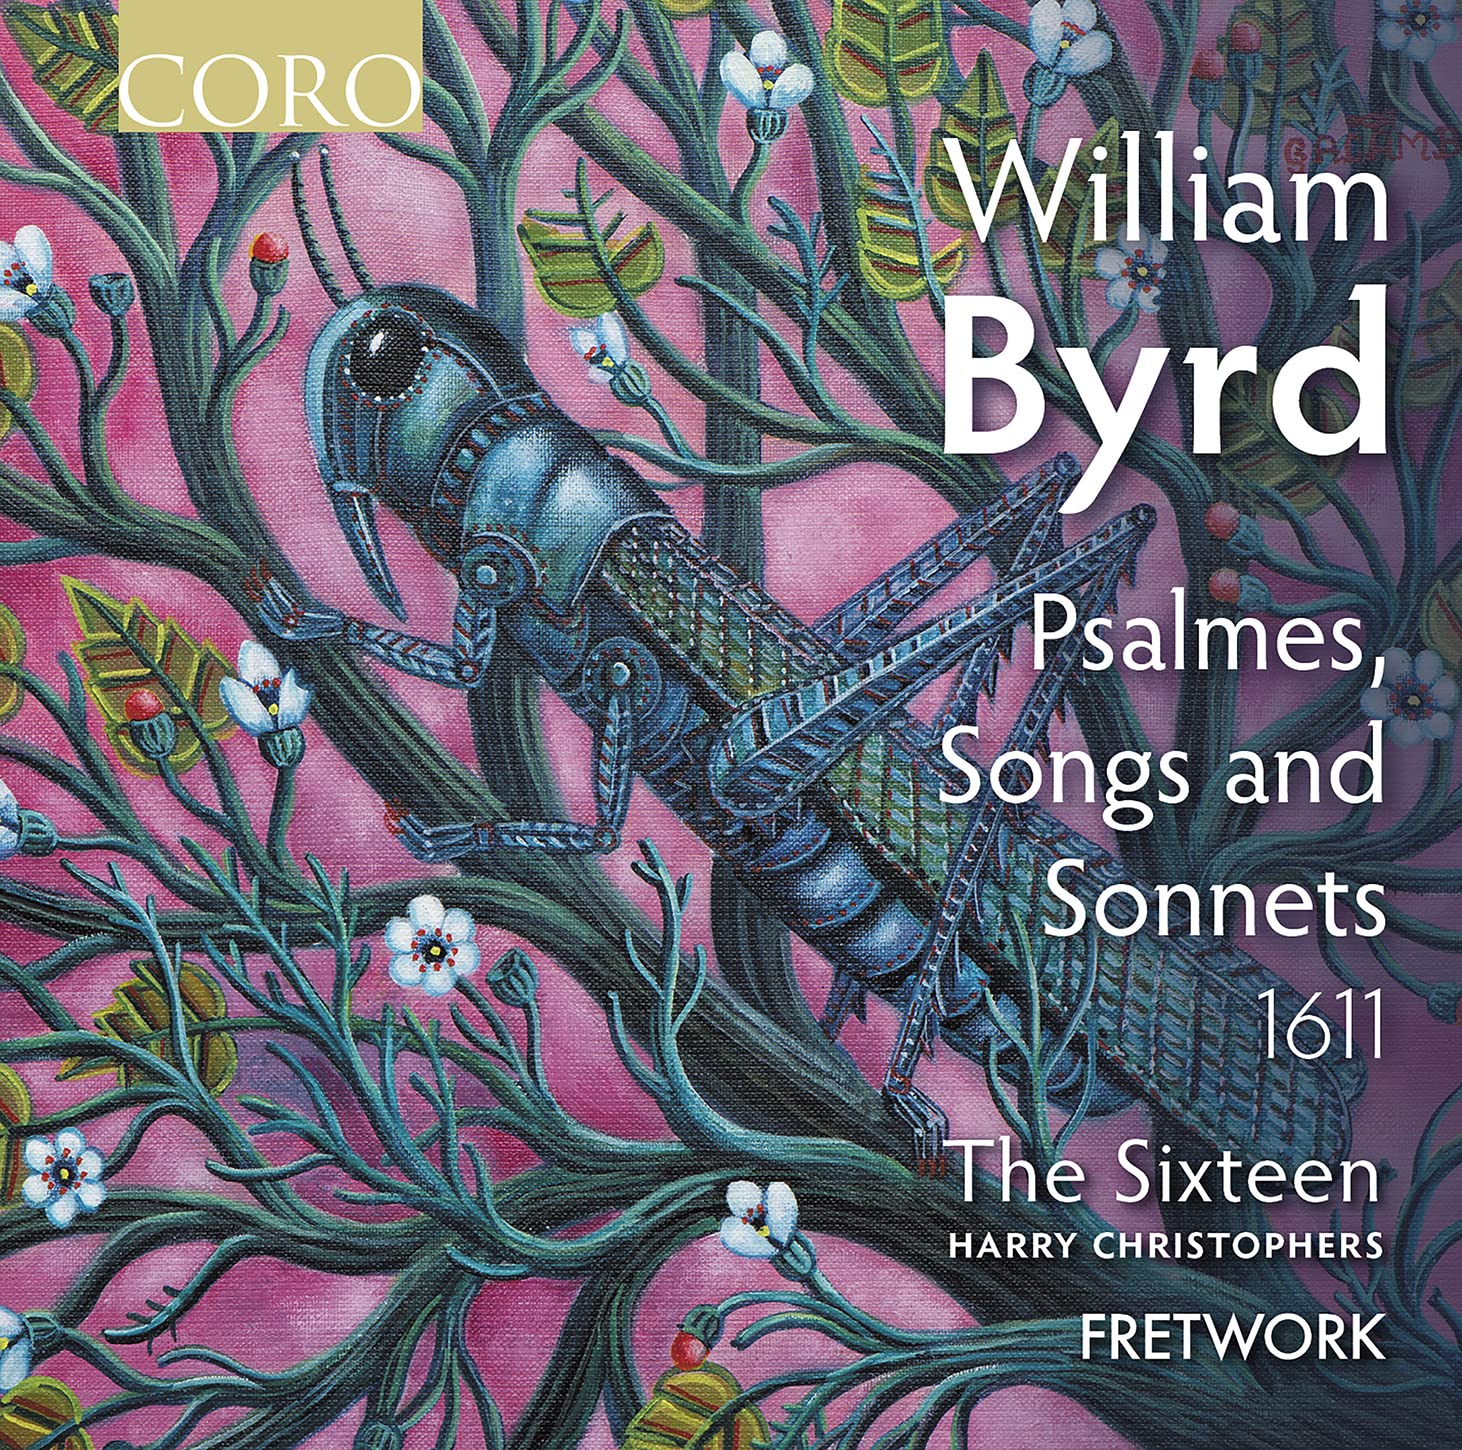 Byrd: Psalmes, Songs and Sonets (1611)